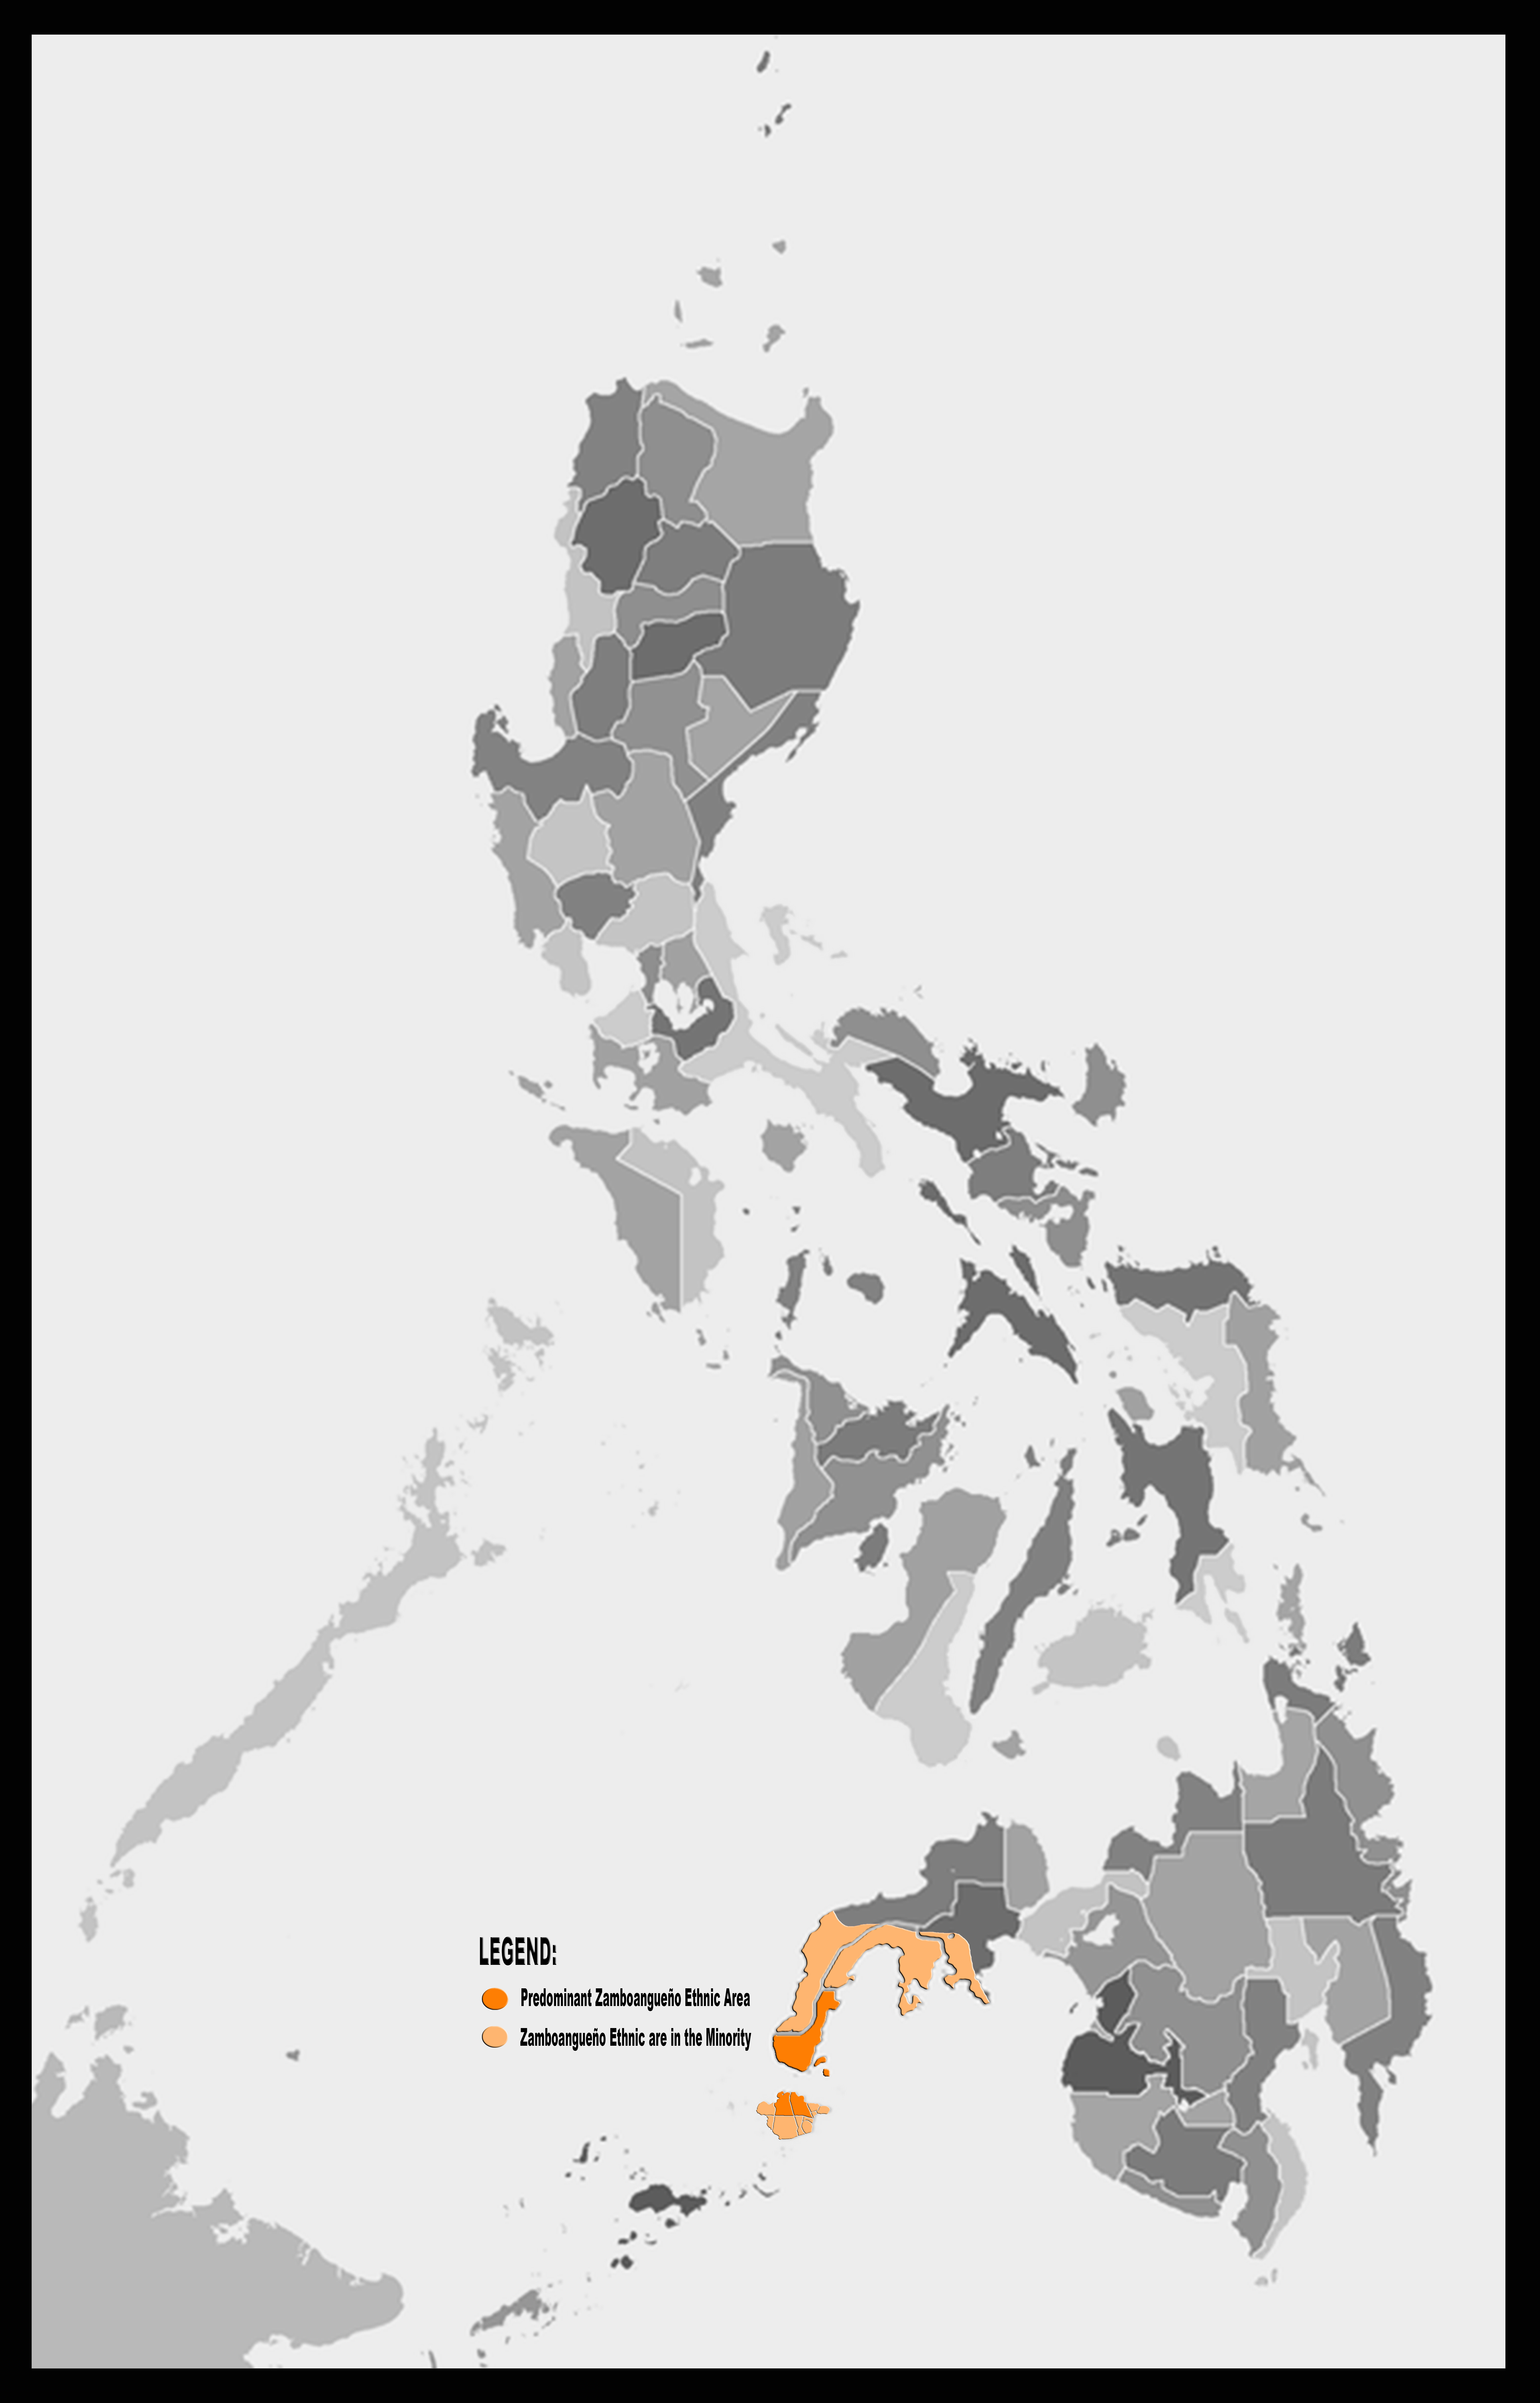 The Zamboangueño people (Chavacano: Pueblo Zamboangueño), are a creole ethnolinguistic nation of the Philippines originating in Zamboanga City. Spanish censuses records previously showed that as much as one-third of the inhabitants of the city of Zamboanga possess varying degrees of Iberian and Hispanic-American admixture. In addition to this, select cities such as Iloilo, Bacolod, Dumaguete, Cebu, and Cavite, which were home to military fortifications and/or commercial ports during the Spanish era also hold sizable mestizo communities.The Zamboangueño nation constitute an authentic and distinct ethnolinguistic identity because of their coherent cultural and historical heritage, most notably Chavacano, that distinguishes them from neighboring ethnolinguistic nations. As a result of Spanish colonization, according to a genetic study written by Maxmilian Larena, published in the 2021 Proceedings of the National Academy of Sciences of the United States, the Philippine ethnic groups with the highest amount of Spanish/European descent are the Zamboangueño, with 4 out of 10 Zamboangueños being of Spanish descent (40% of the population), this is followed by Bicolanos, with 2 out of 10 Bicolanos being of Spanish descent (20% of the population). Meanwhile, there are "some" Spanish descended people among the other lowland Christianized Filipino ethnic groups.